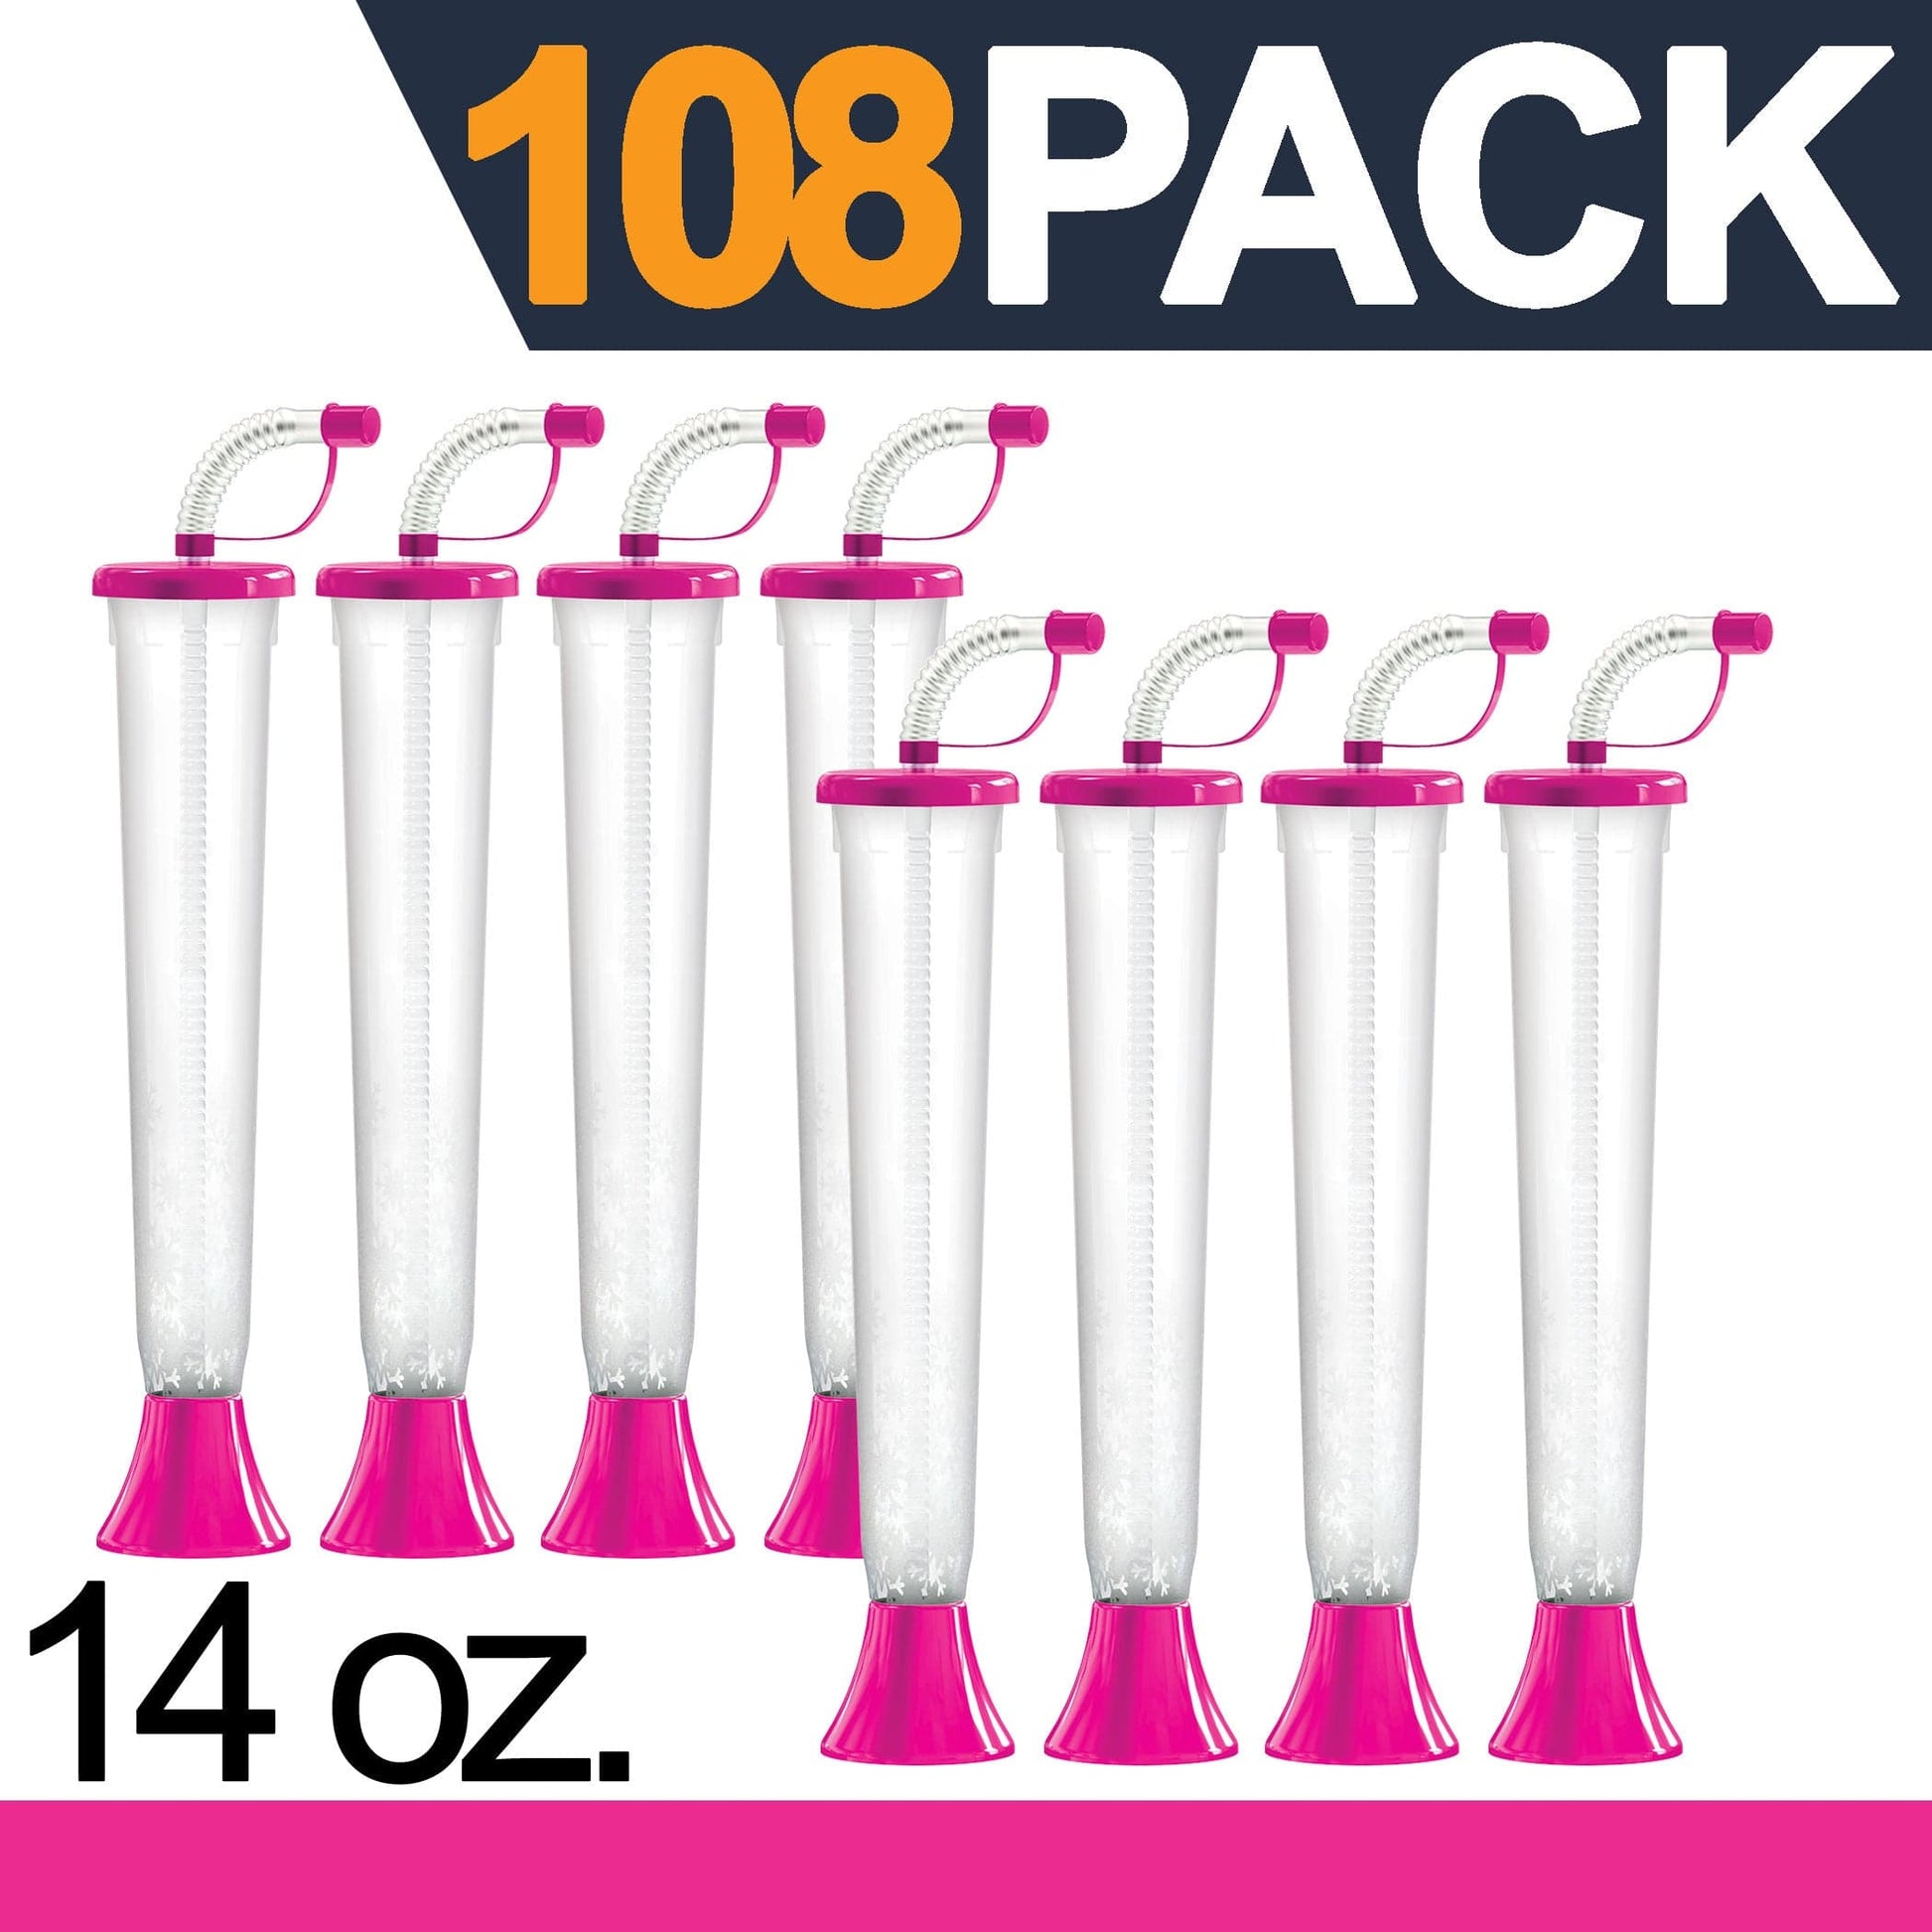 Sweet World USA Yard Cups 108 Cups Yard Cups with PINK Lids and Straws - for Margaritas, Cold Drinks, Frozen Drinks, Kids Party - 14 oz. (400 ml) cups with lids and straws